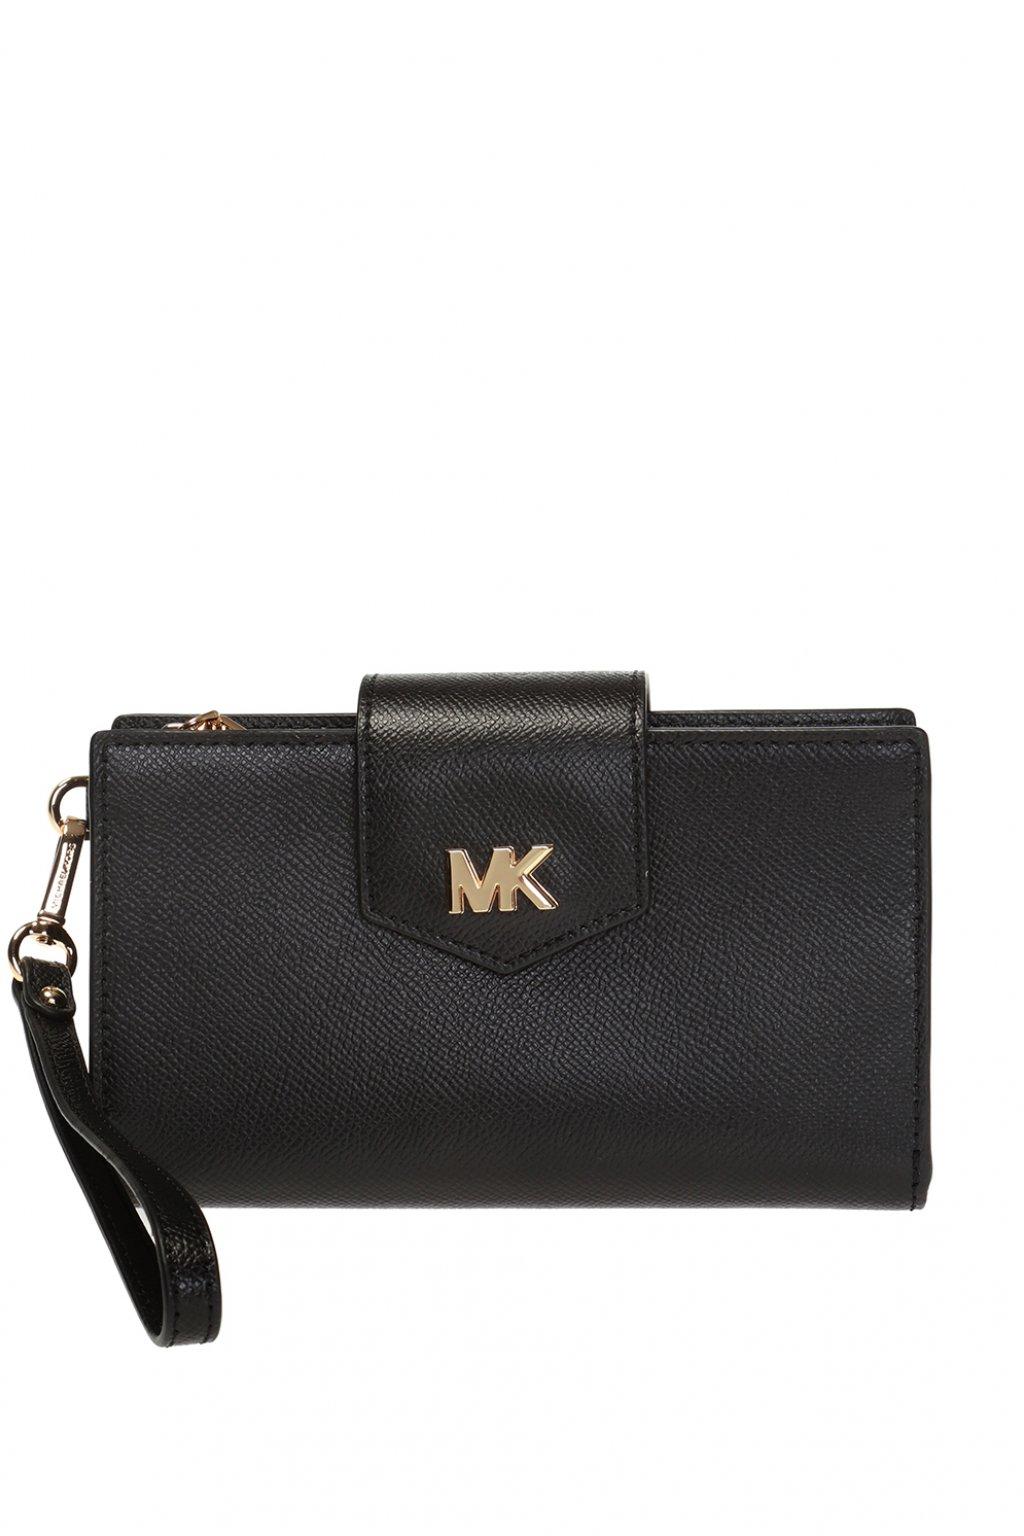 Michael Kors Wallet With Wrist Strap in Black - Lyst